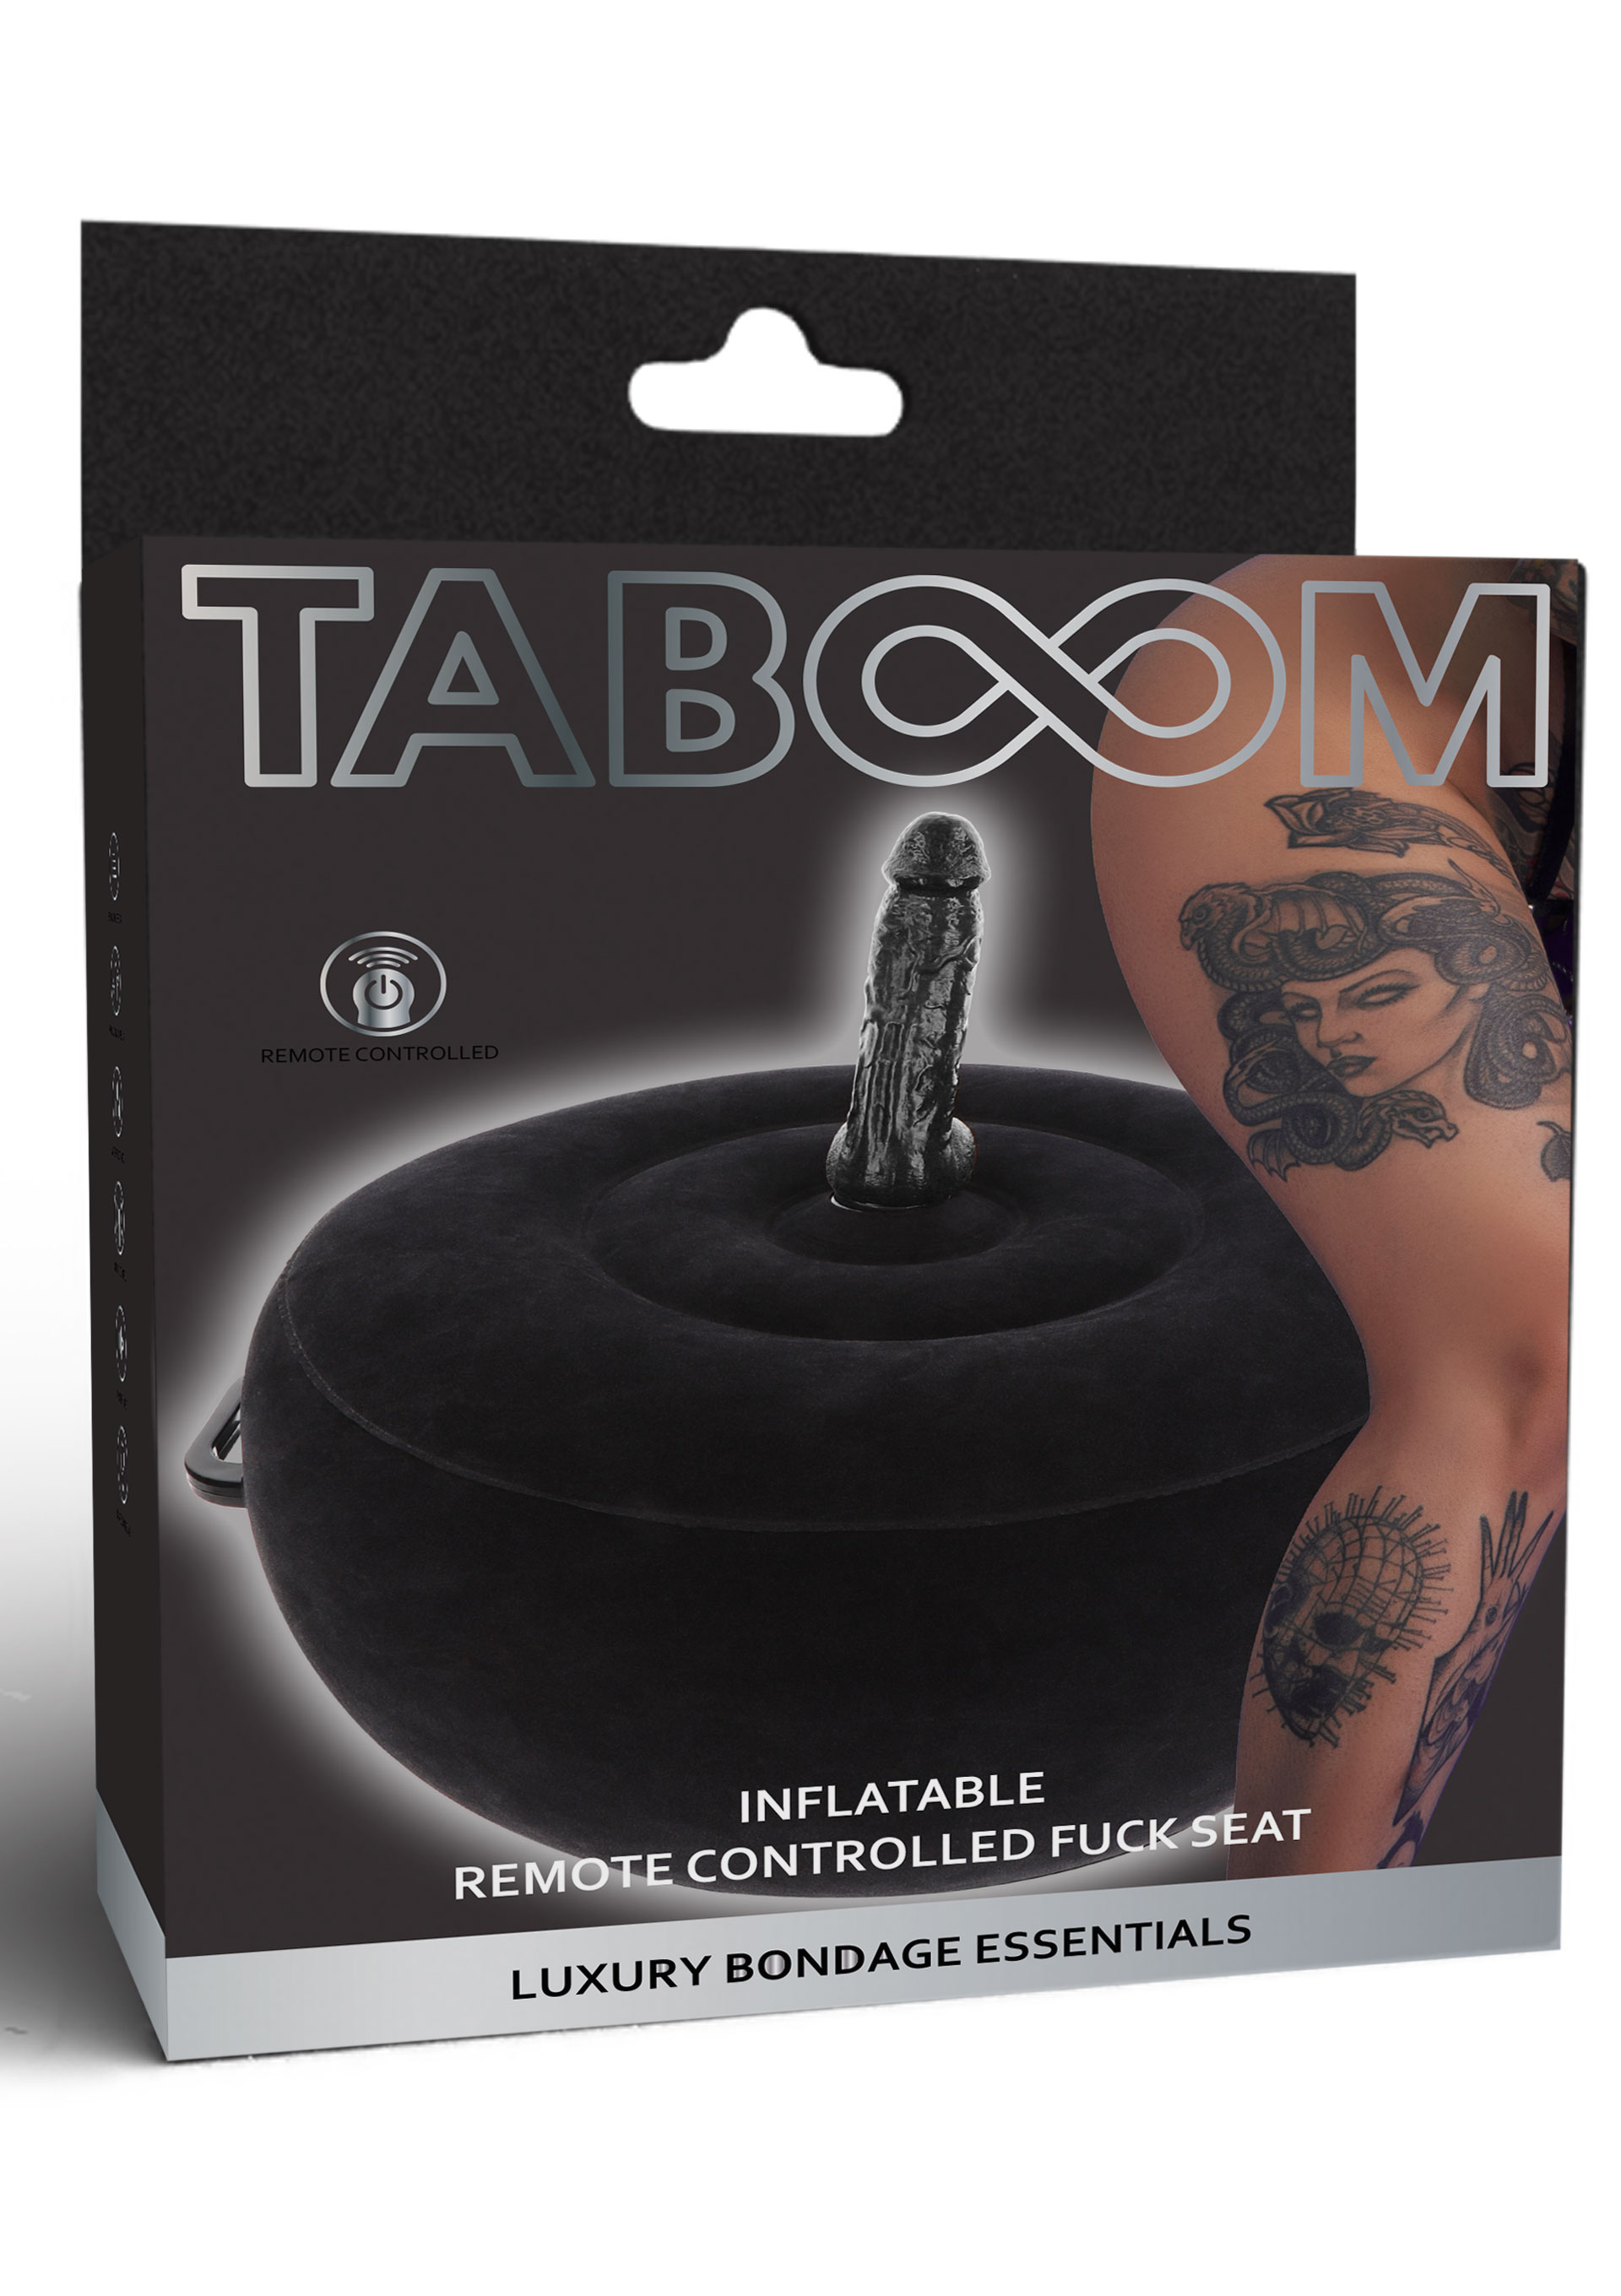 Taboom - Taboom Inflatable Fuck Seat w. Remote